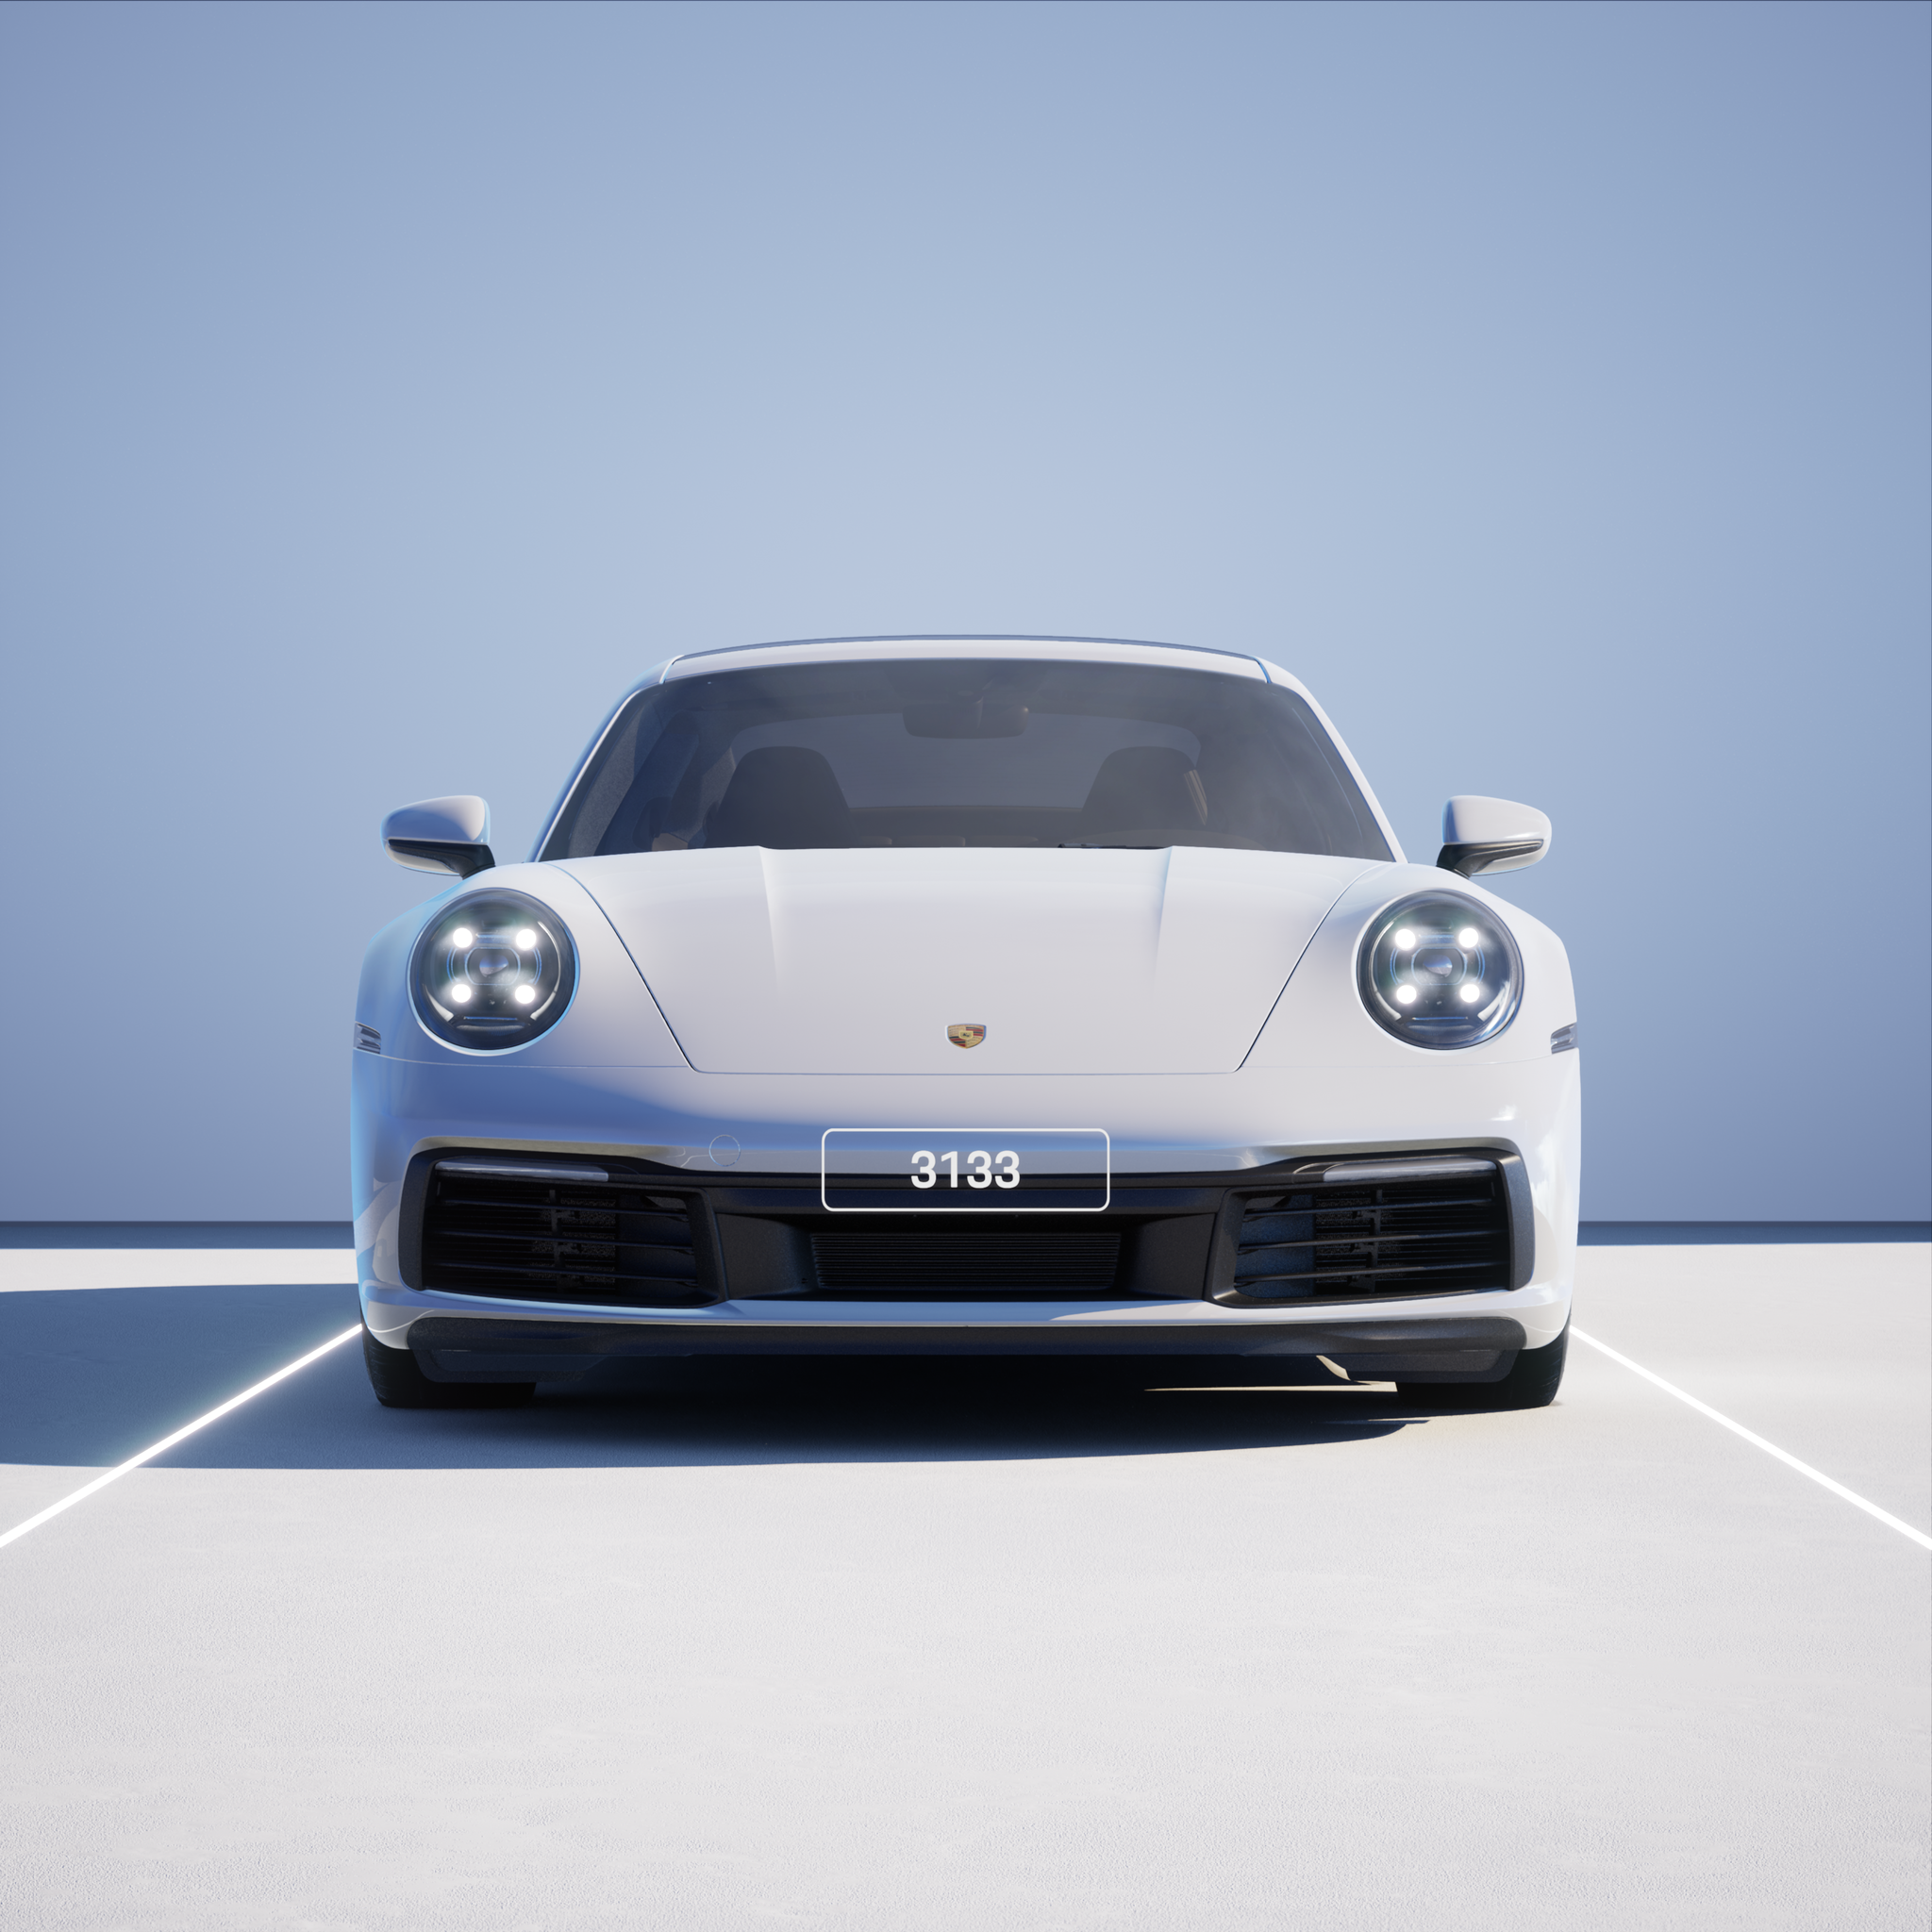 The PORSCHΞ 911 3133 image in phase